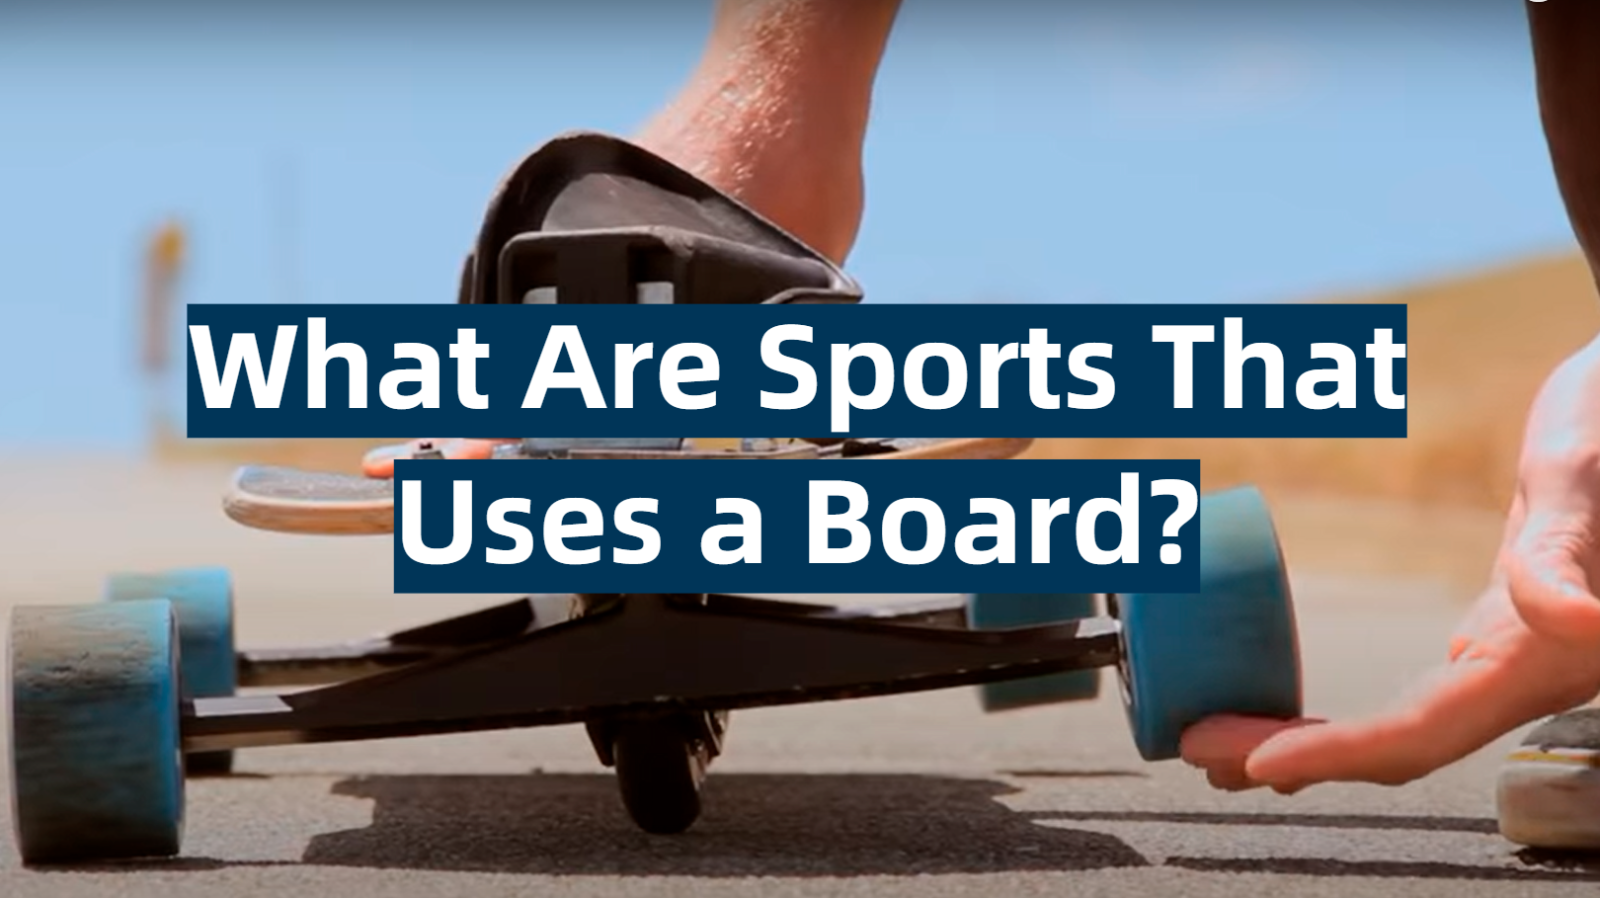 What Are Sports That Uses a Board?